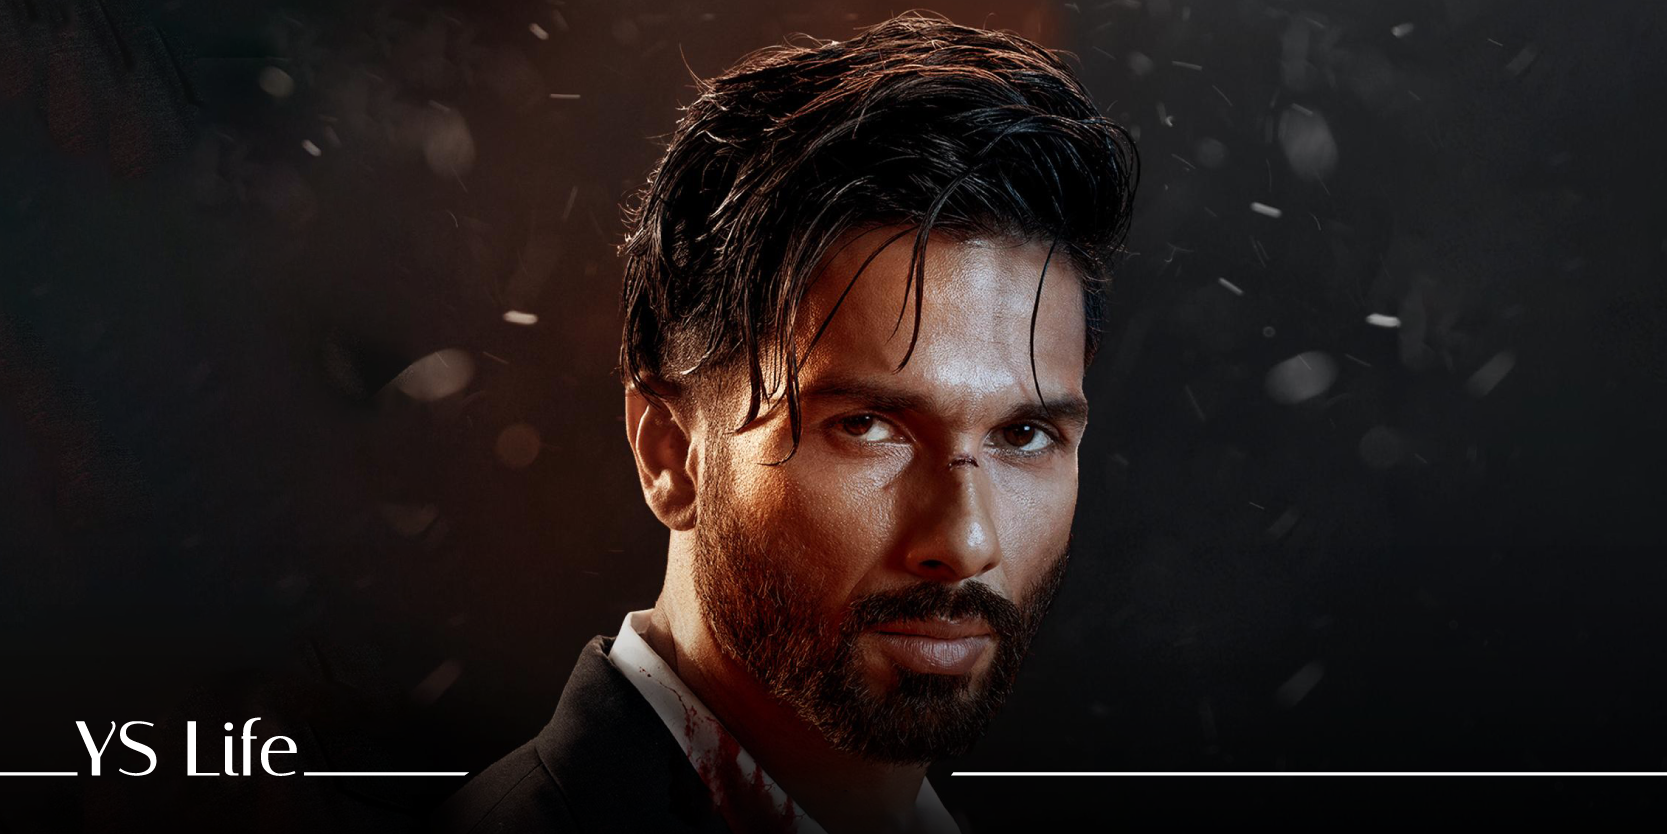 Shahid Kapoor impresses in this stylish action-packed thriller ride Bloody Daddy